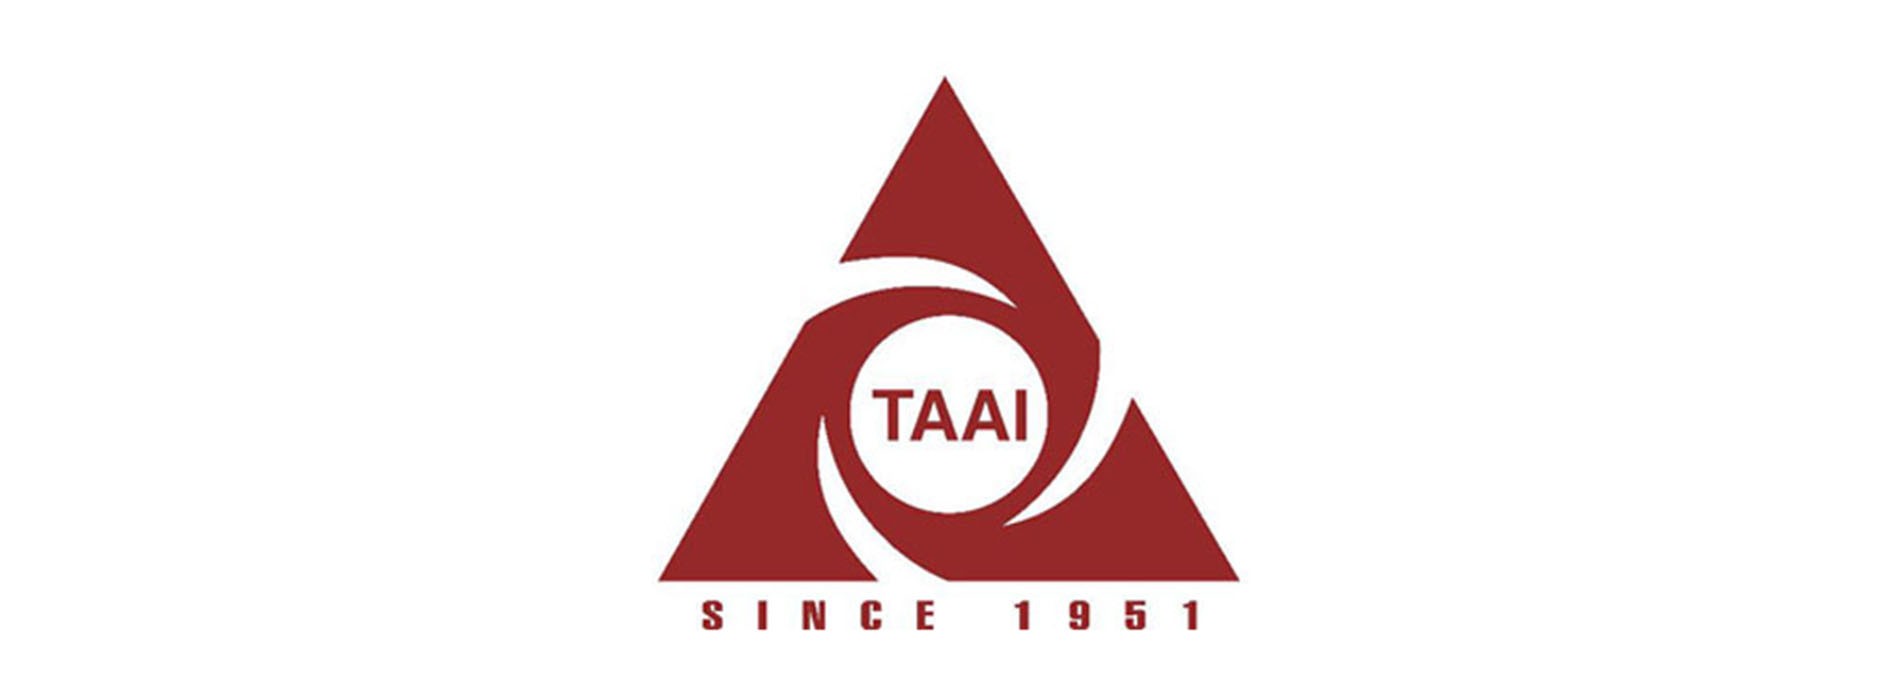 TAAI launches Brochure & Theme Logo for 66th Convention to be held in Sri Lanka in April, 2022